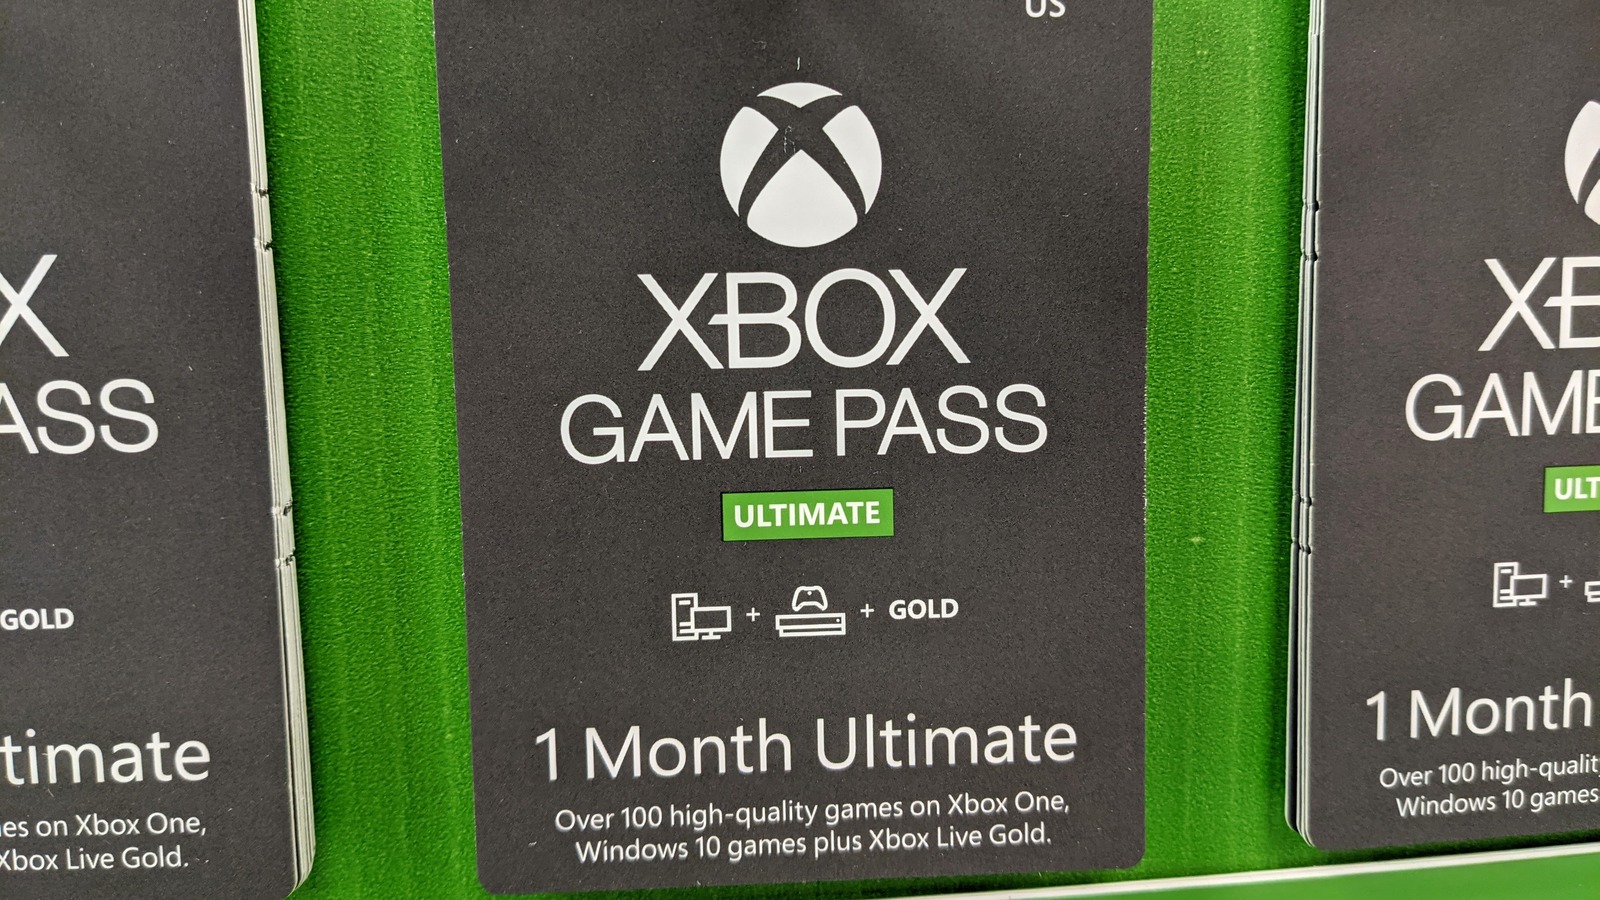 Xbox Game Pass price increase now in effect, Xbox LIVE conversion ratios  have also changed